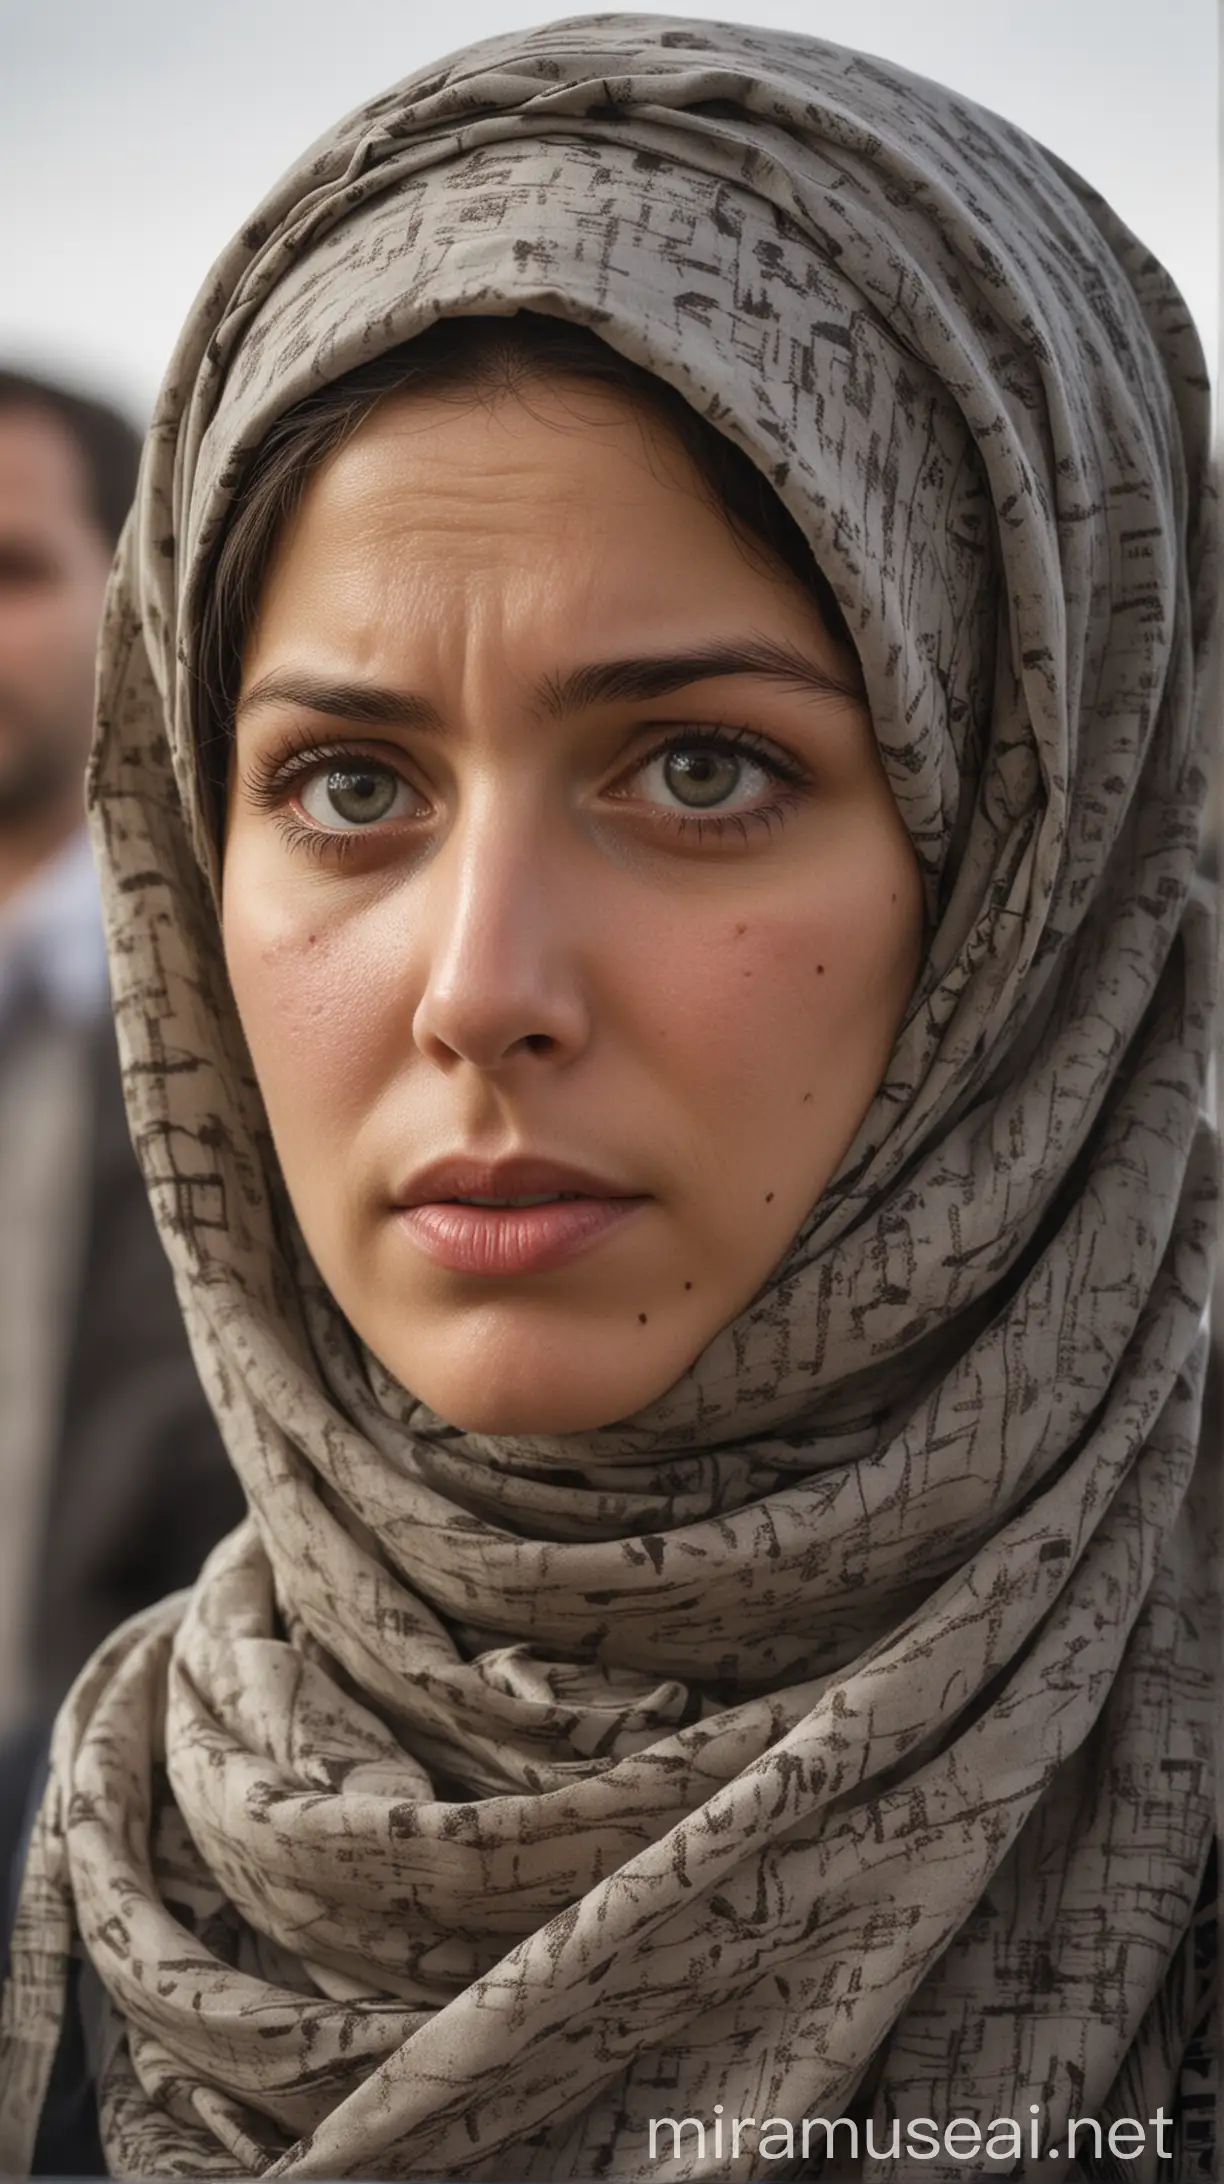 A headscarf symbolizing the plane's crash, with the worried gaze of a woman wearing the headscarf.